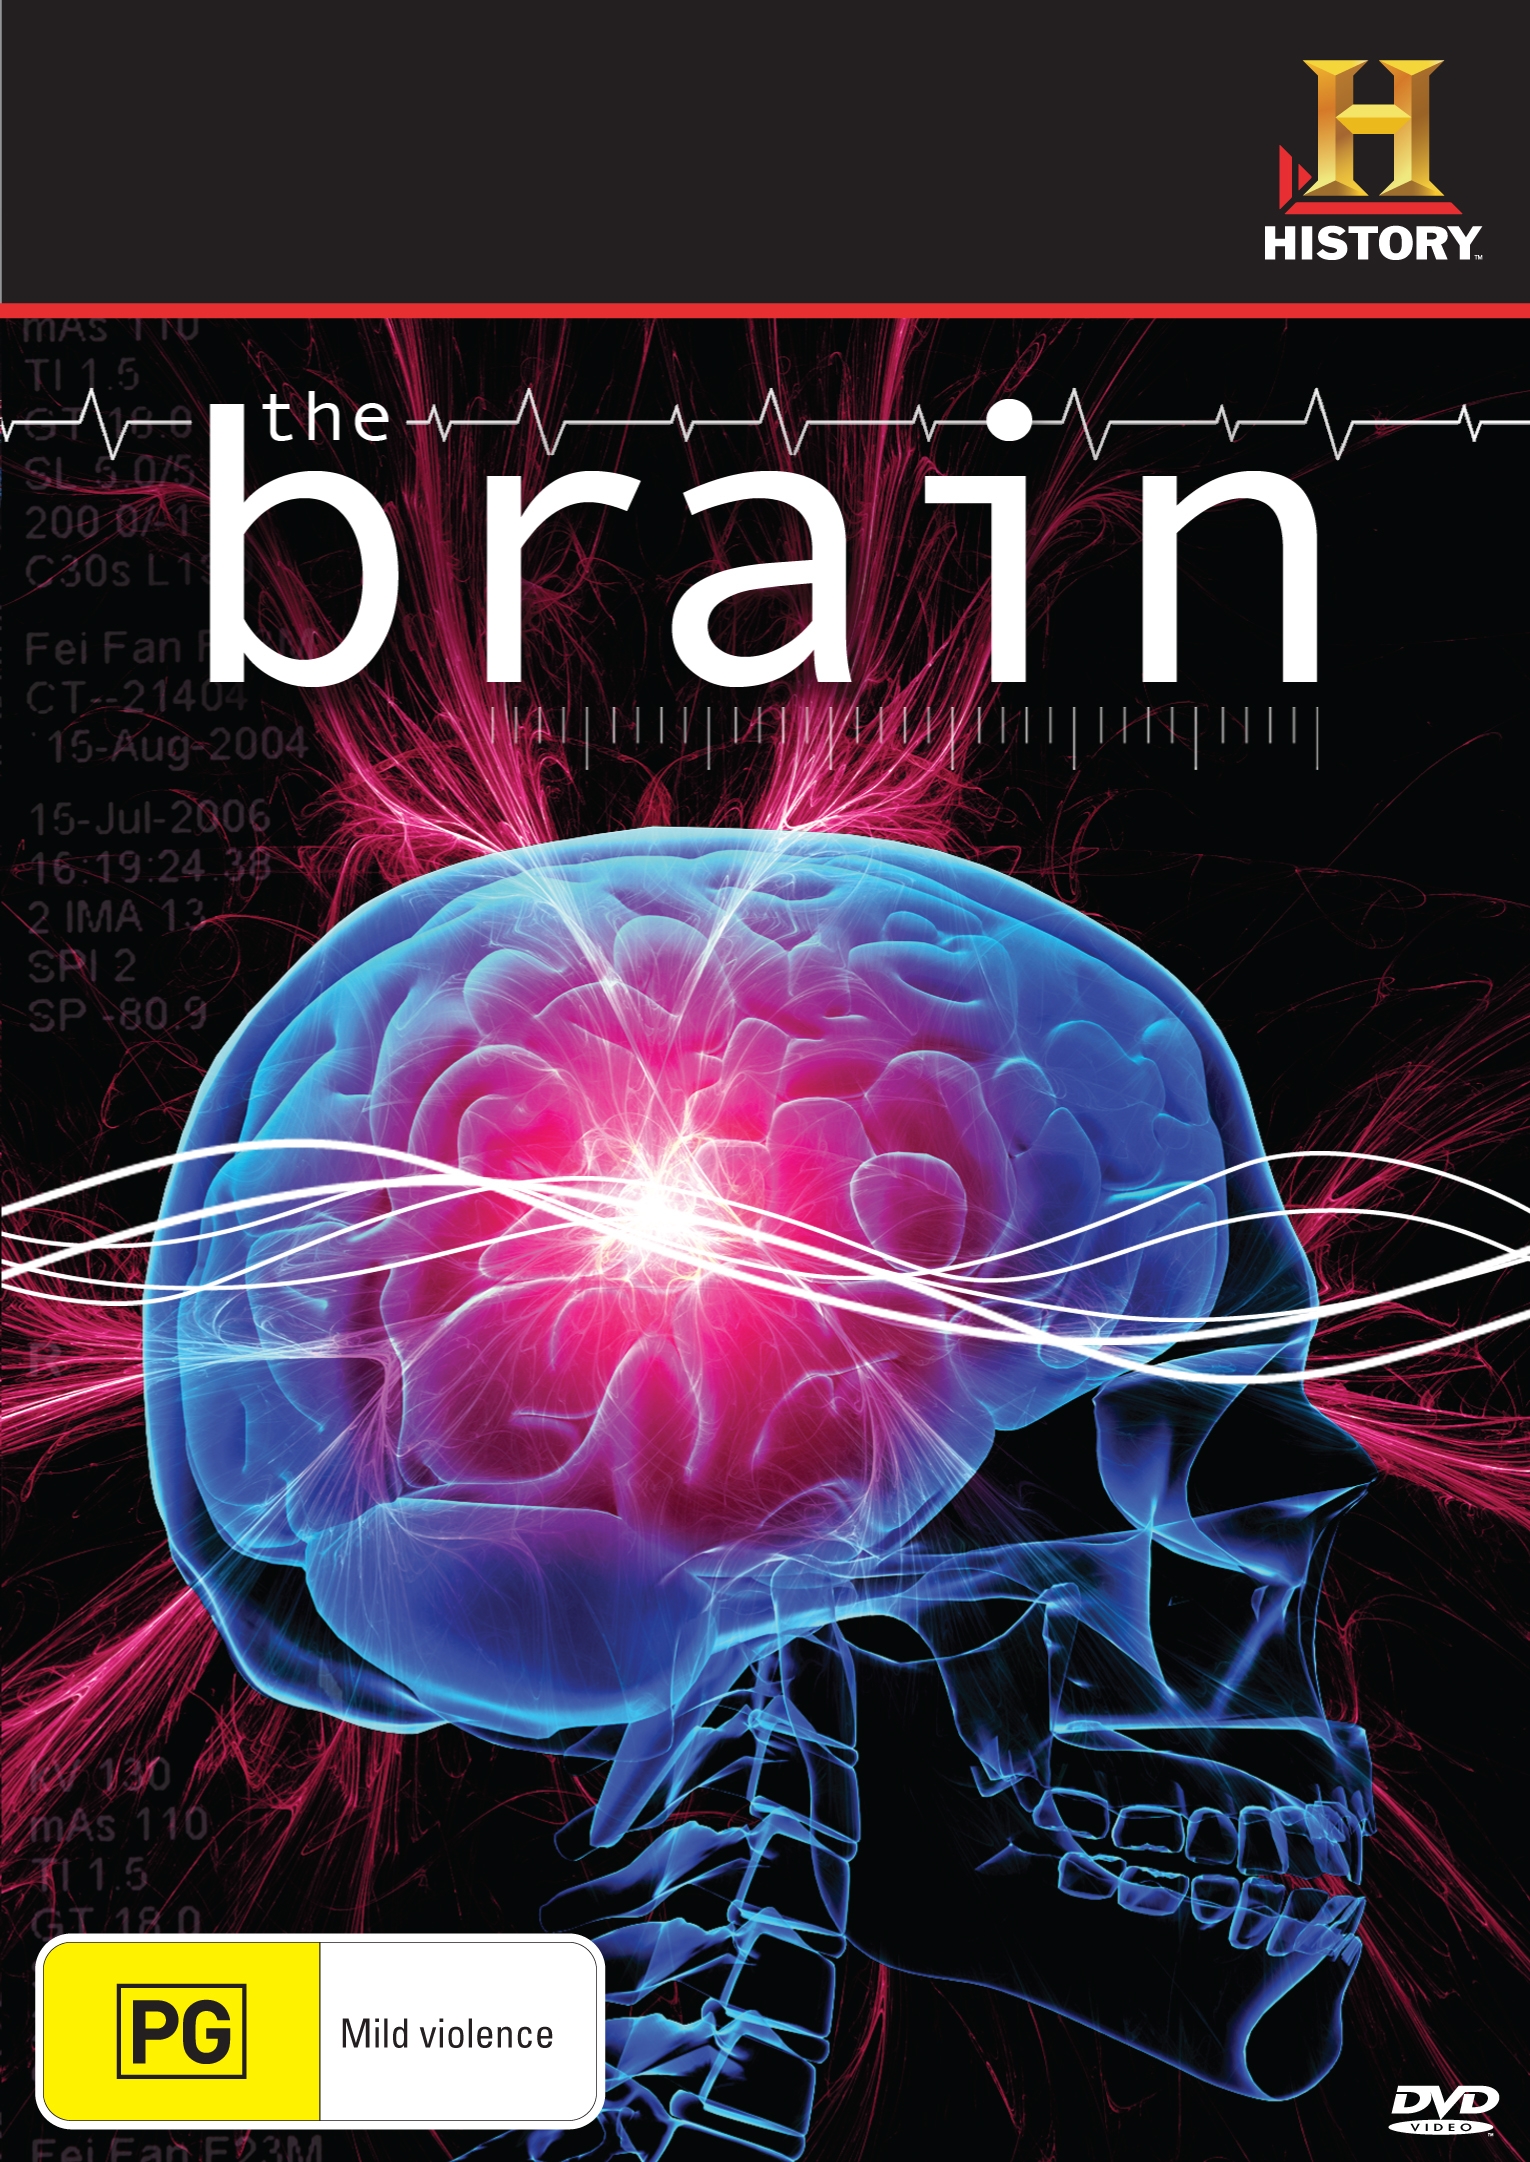 History’s Special “The Brain” Coming to DVD May 2nd